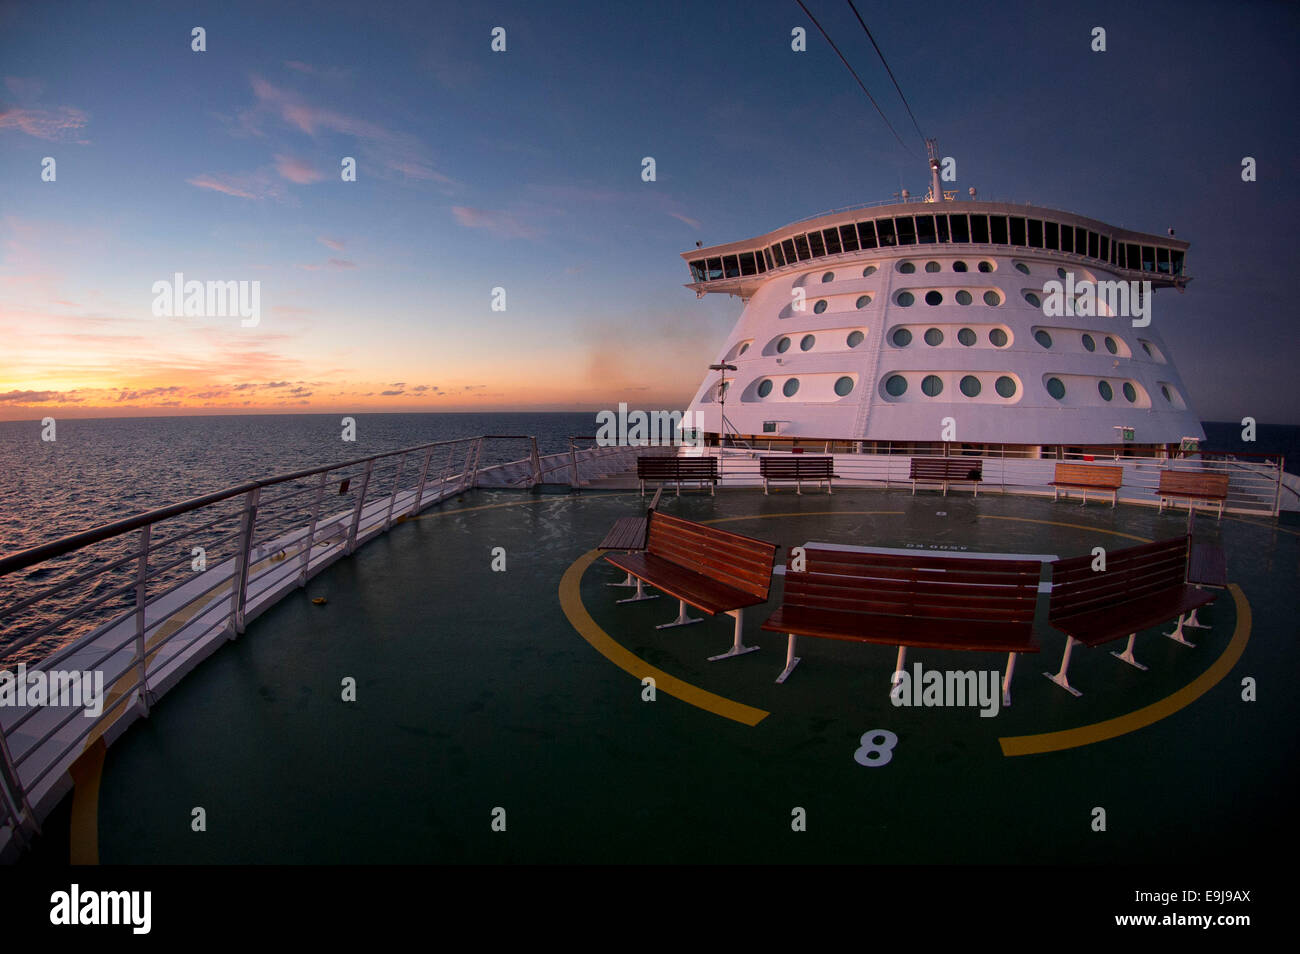 The front (bow) of Royal Caribbean's ship the Adventurer of the seas. Stock Photo